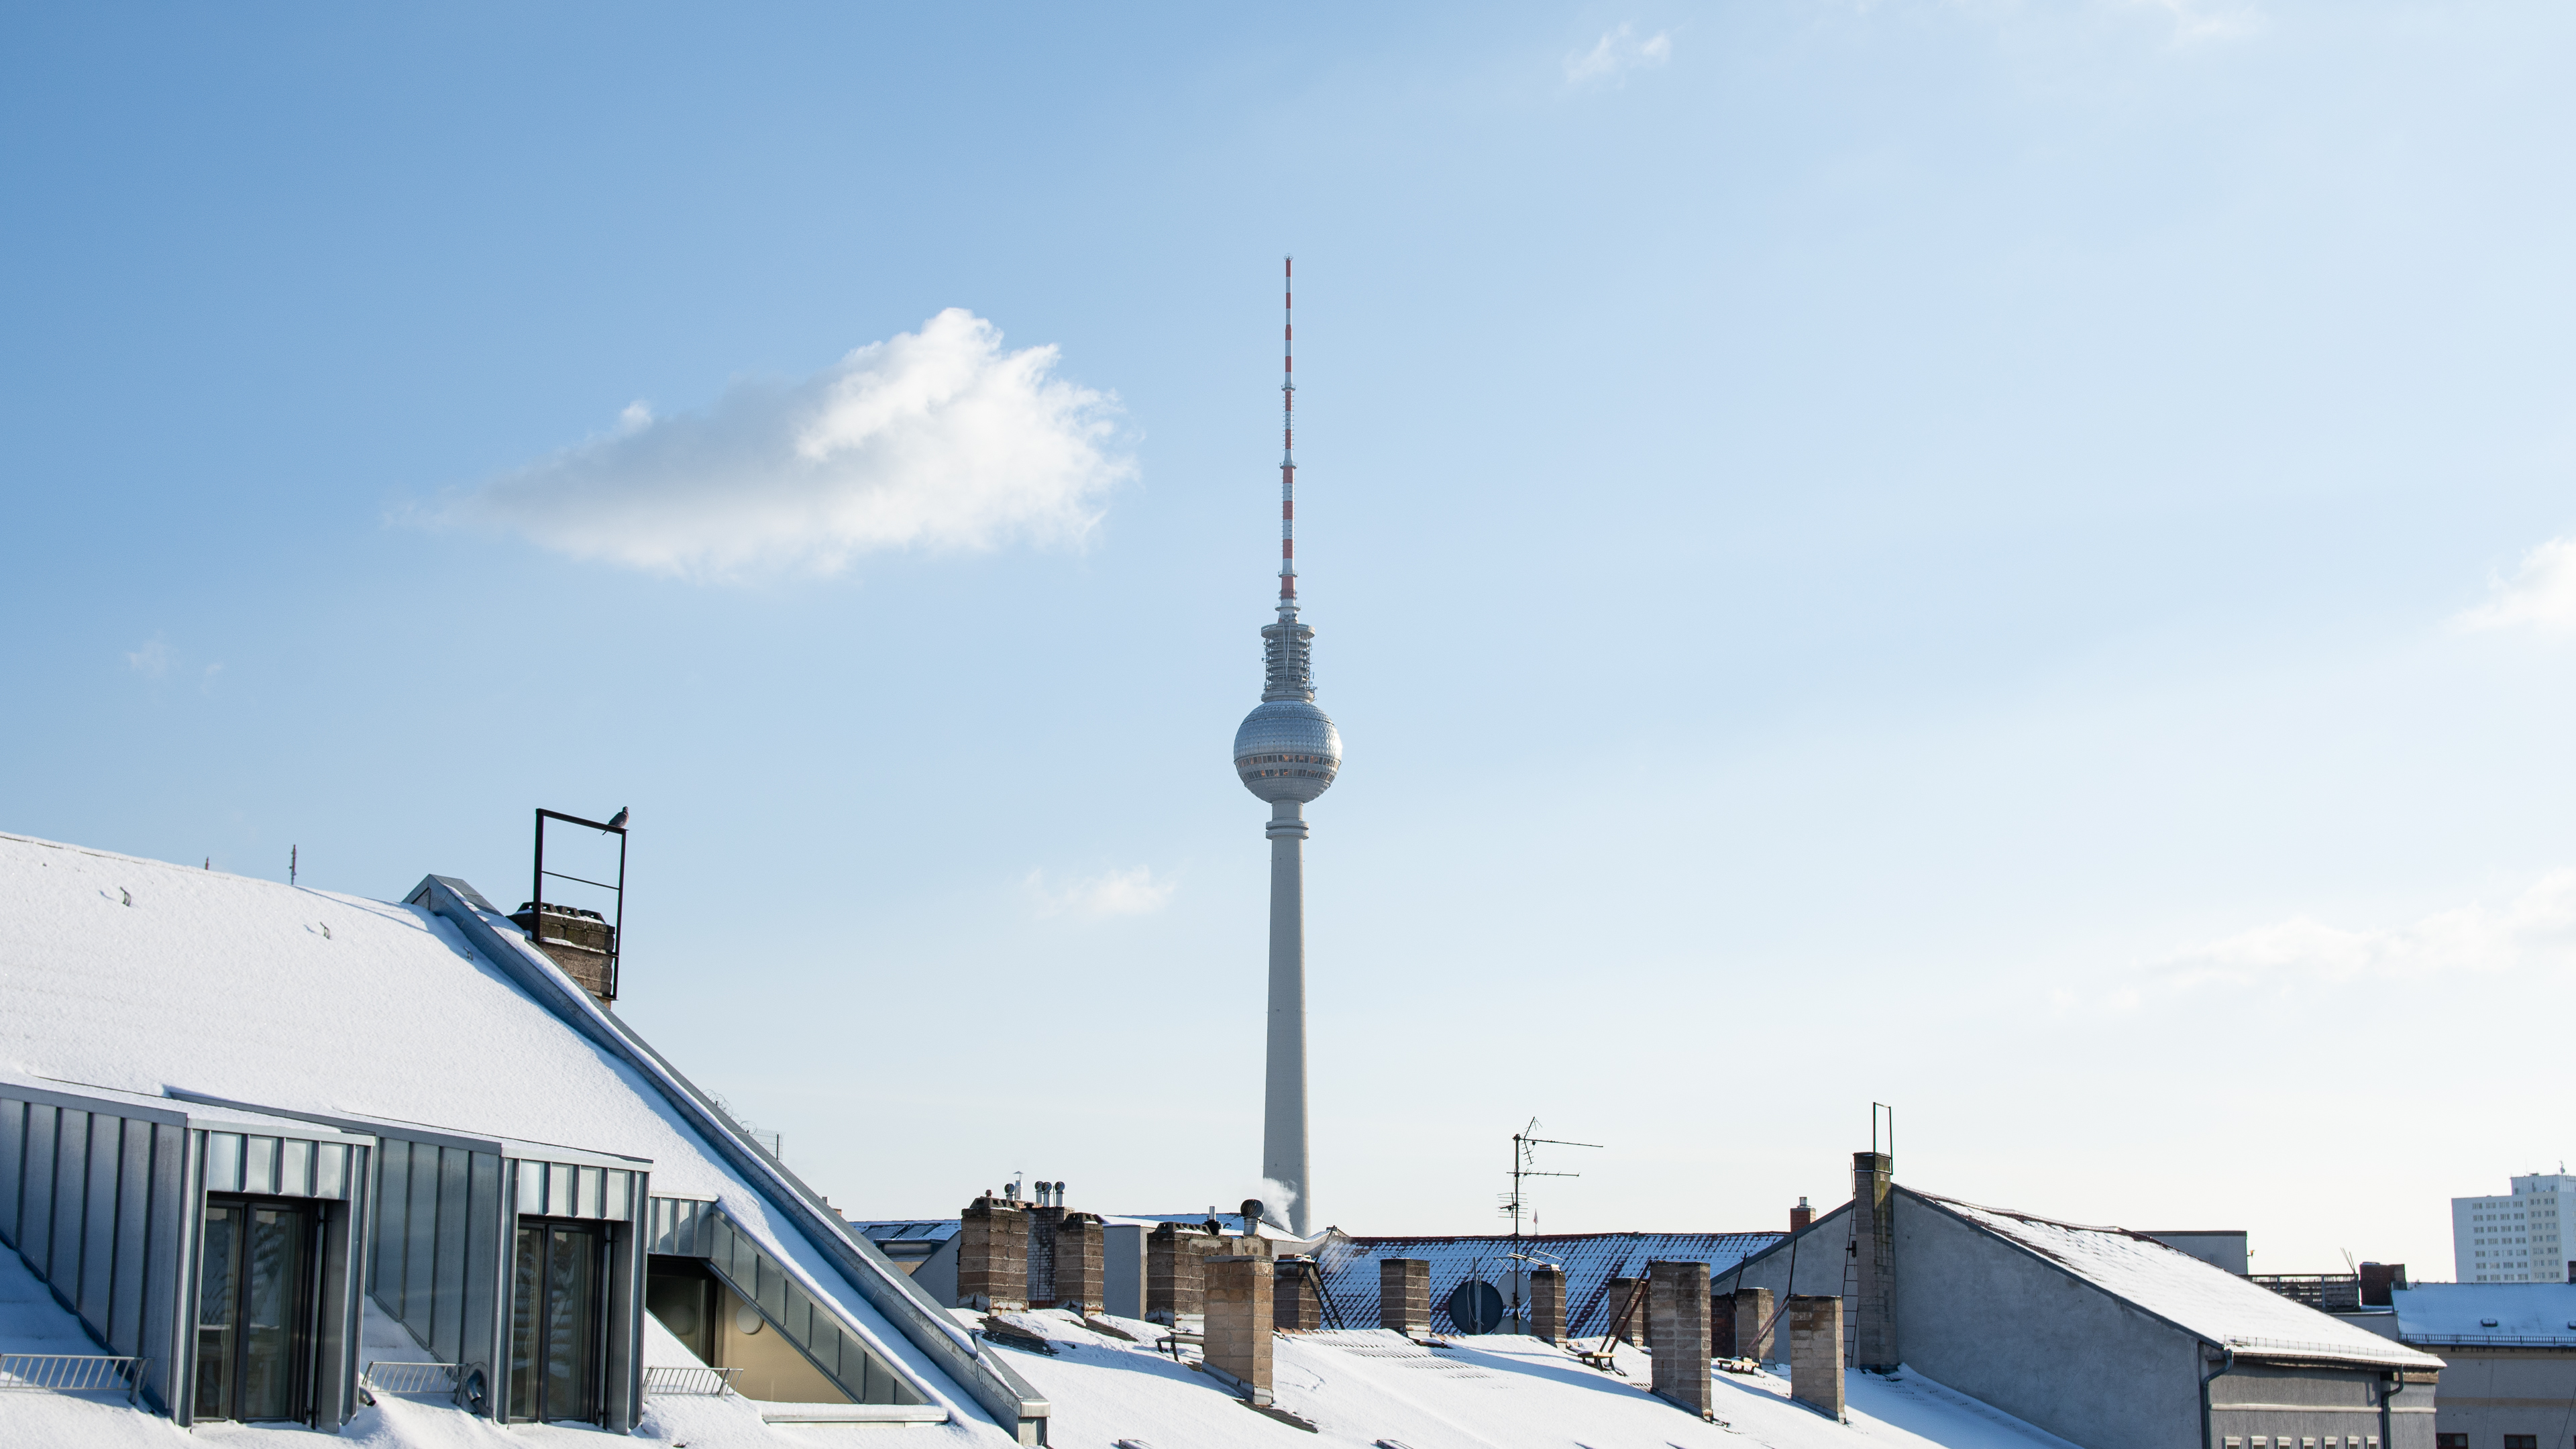 General 3840x2160 city Berlin snow clear sky monuments tower rooftops radio tower